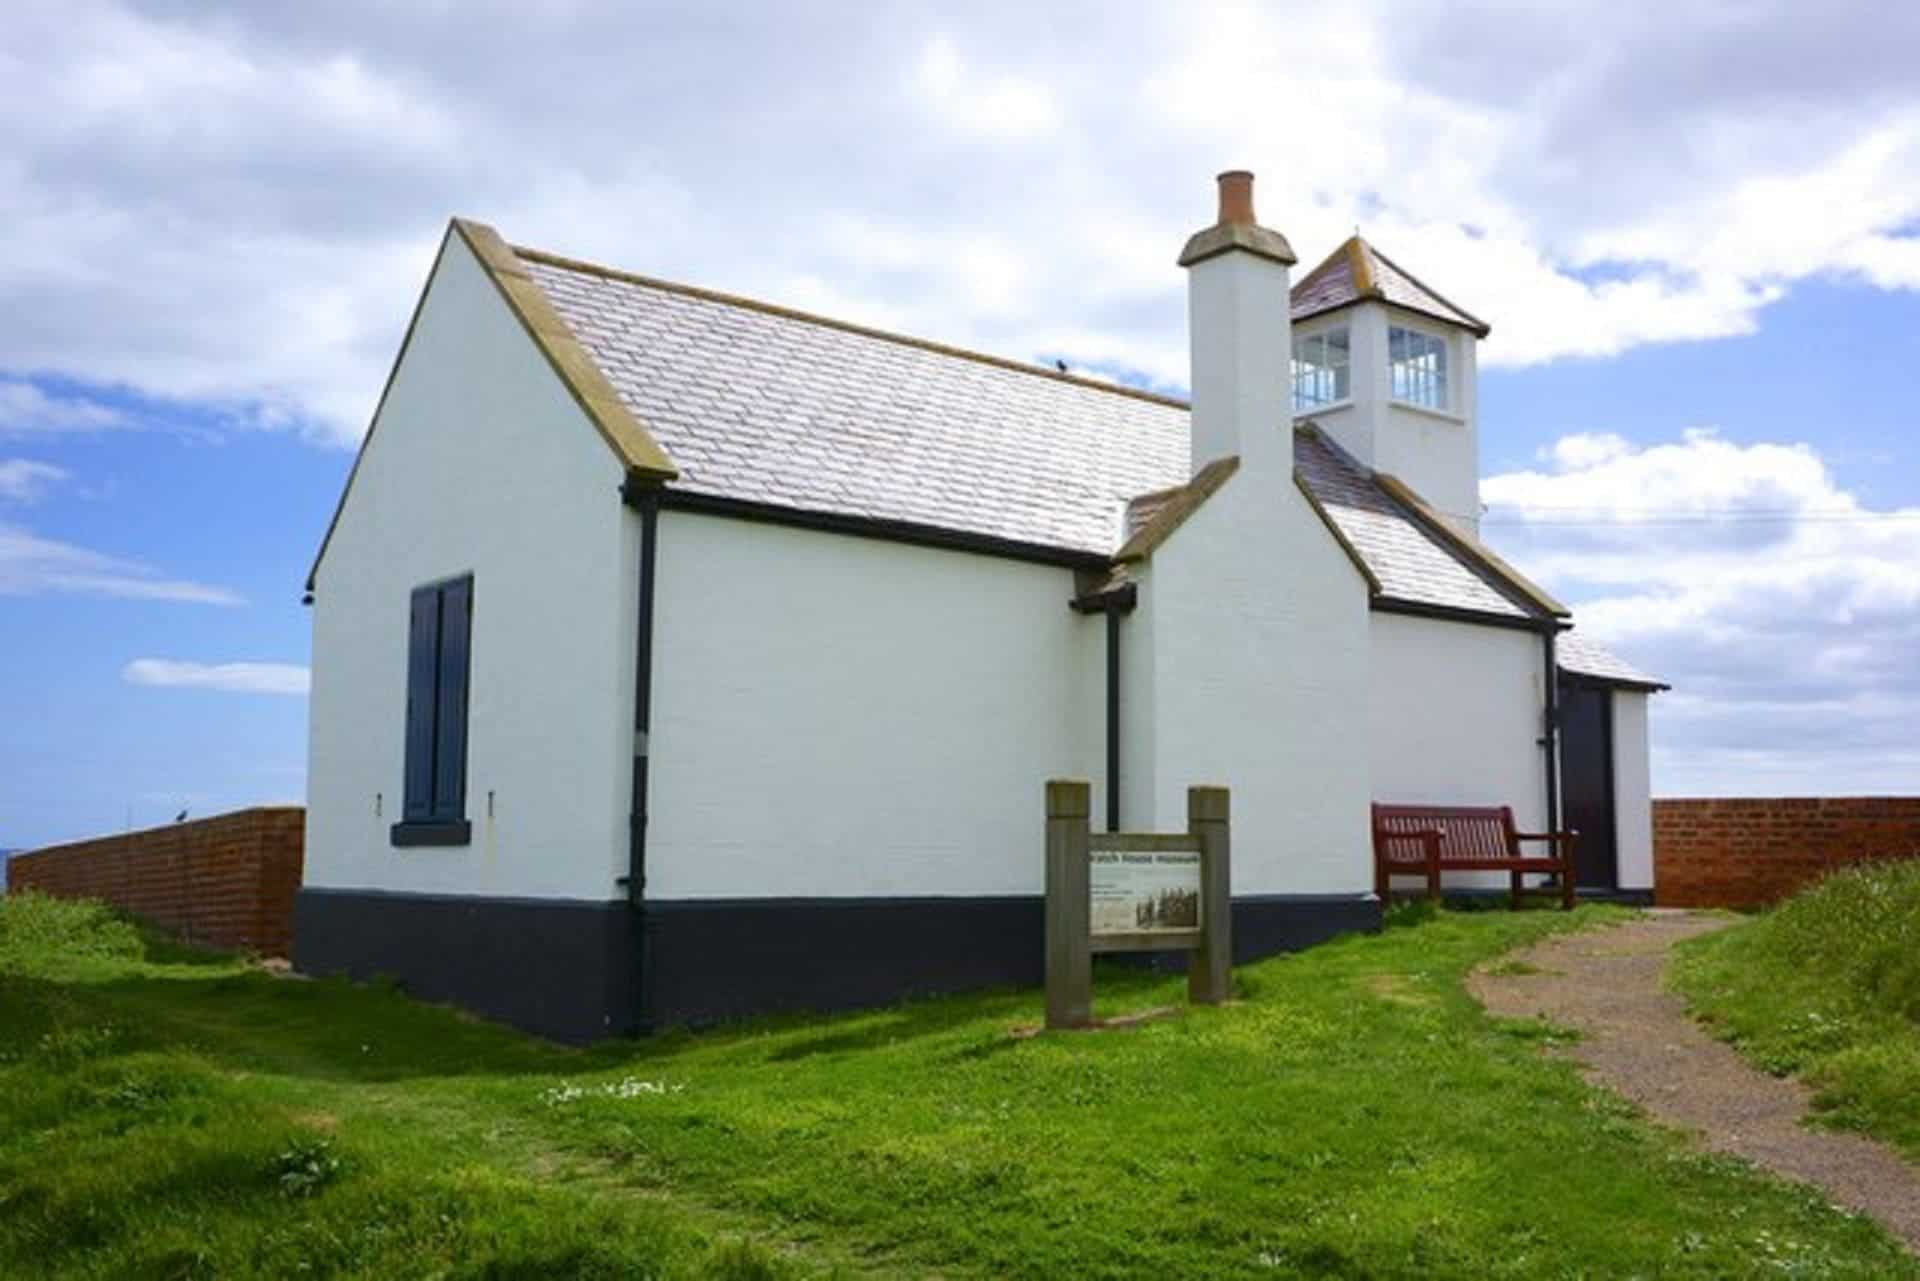 The Watch House Museum in UK